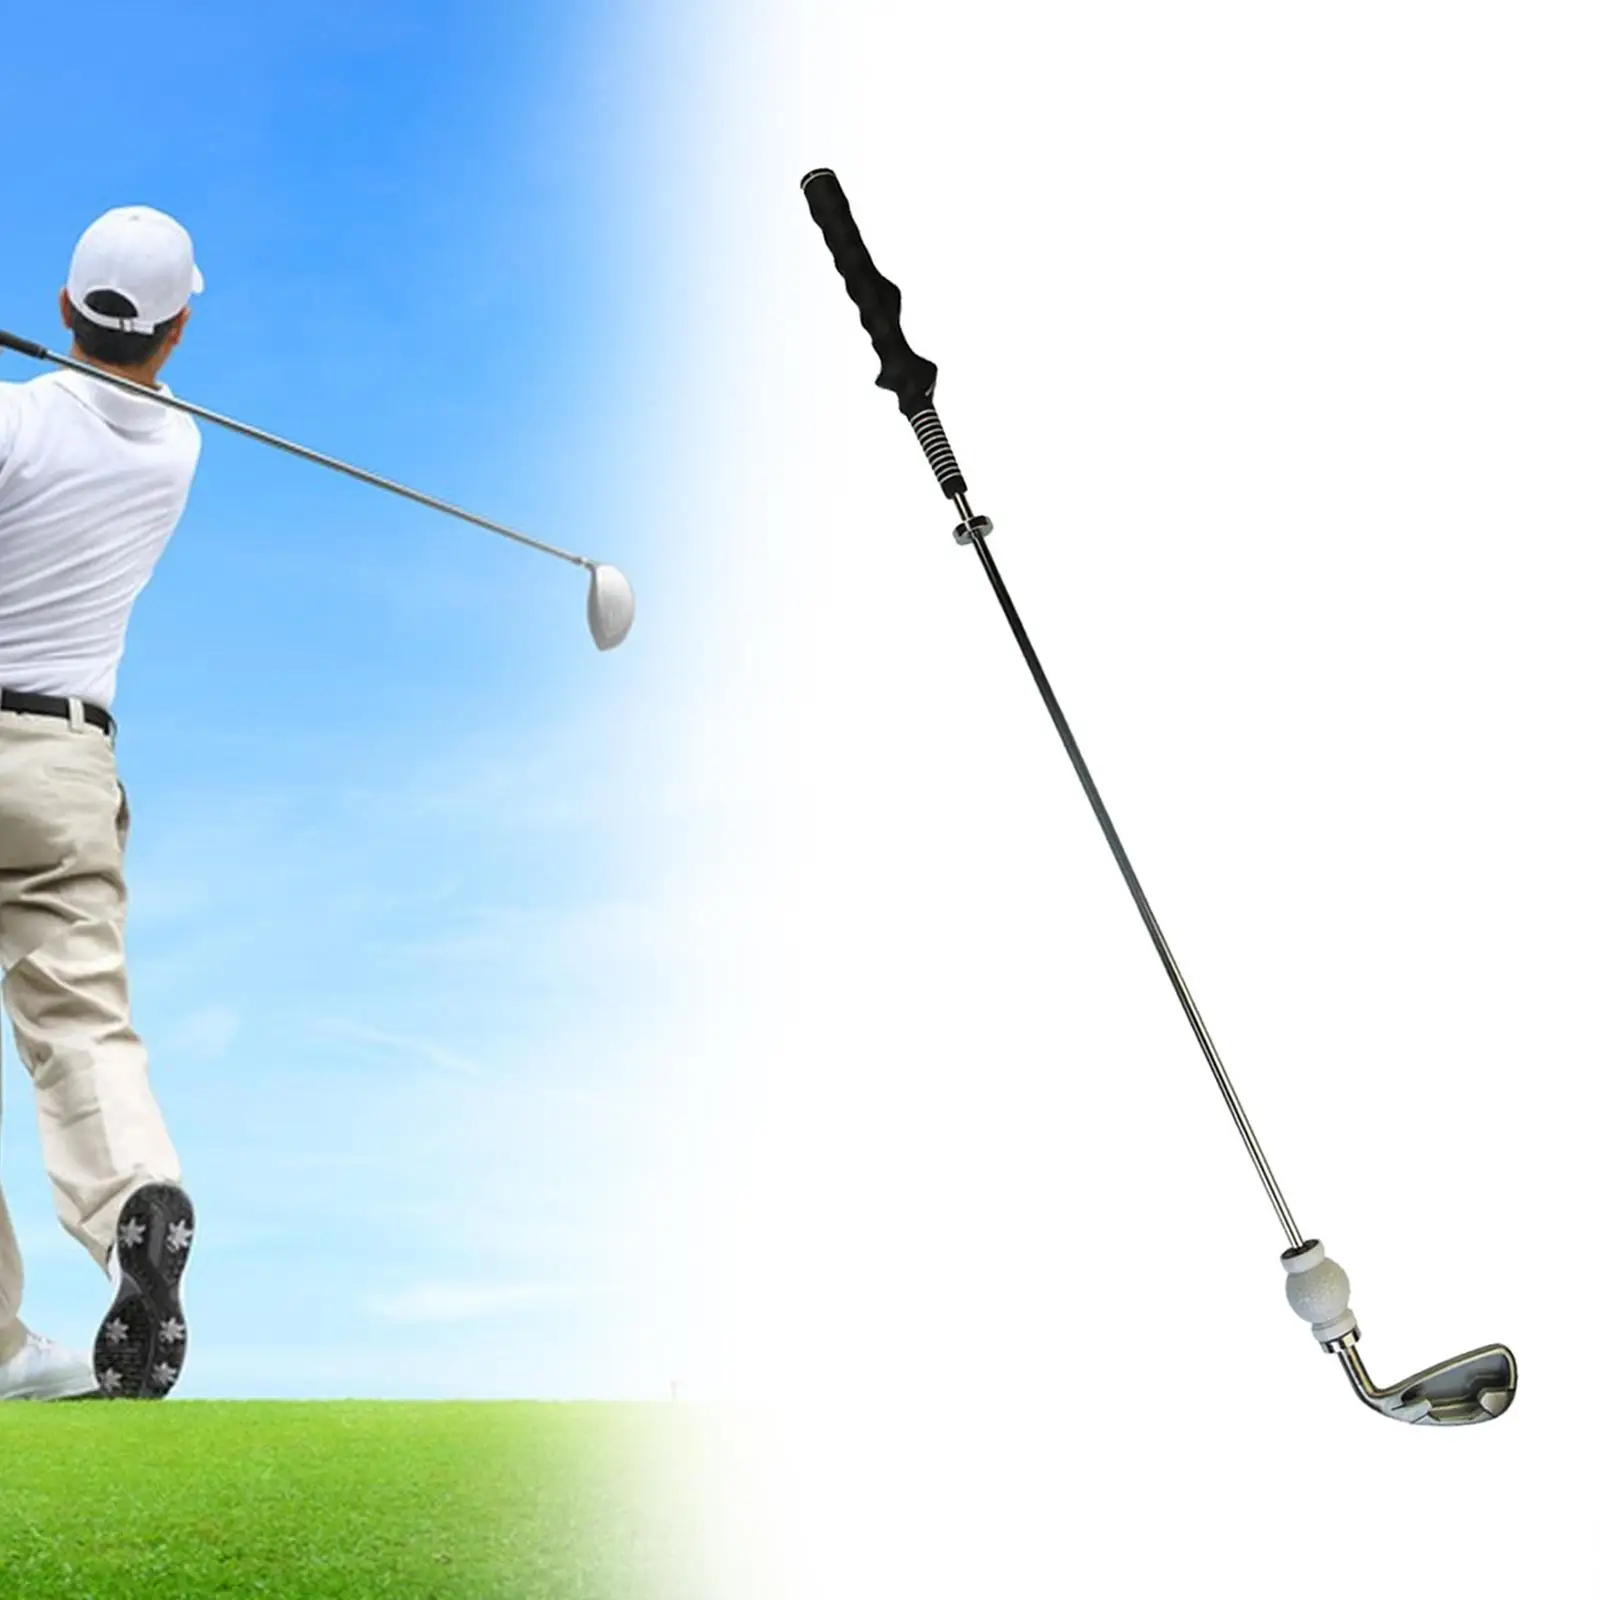 

Golf Magnetic Swing Trainer Lightweight Effectively Improve Swing Skills Equipment Golf Training Aid for Tempo Rhythm Strength